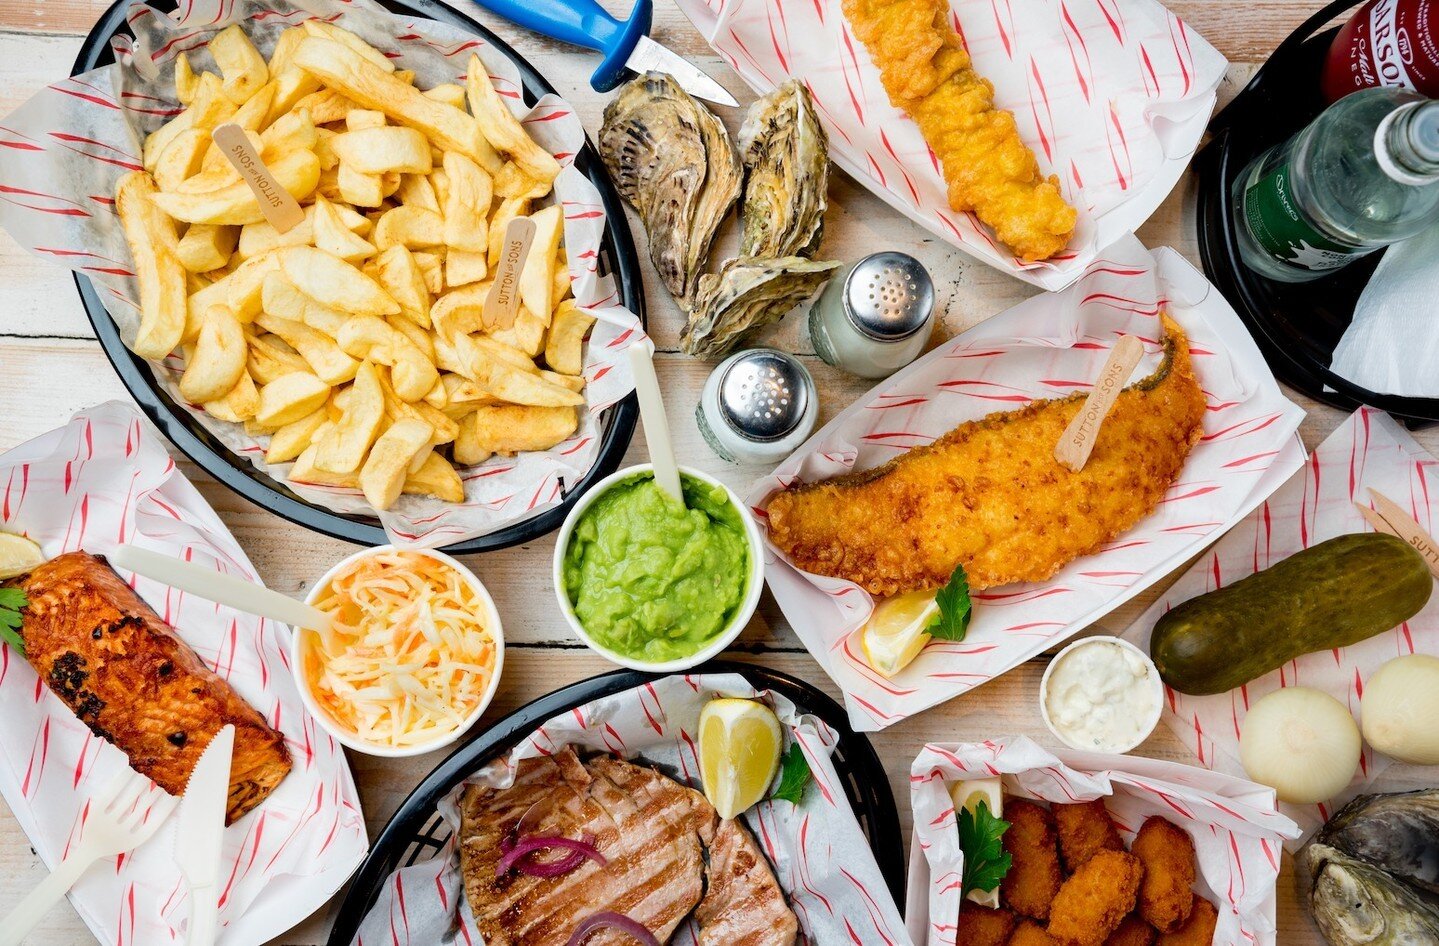 Share a good time with friends and family😀👌

#fishandchips #fishandchipslondon  #londonfood